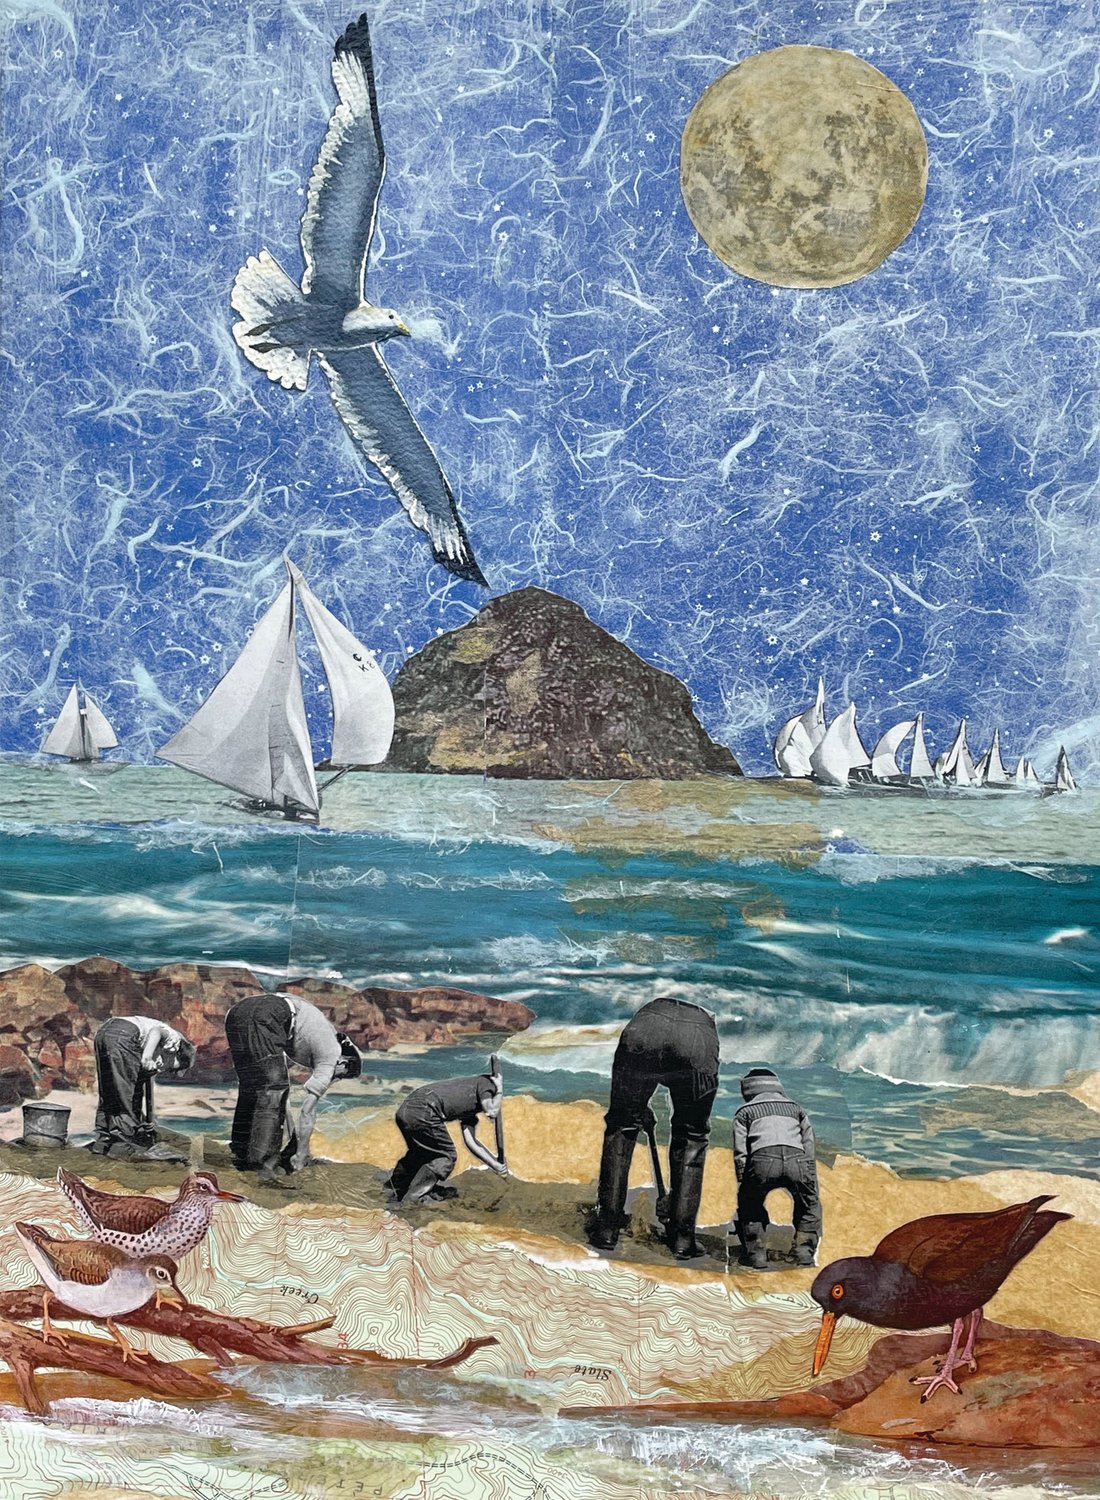 Mixed-media artist Margaret Woodcock uses collage elements, printmaking, and digital imagery to create unique works of art.